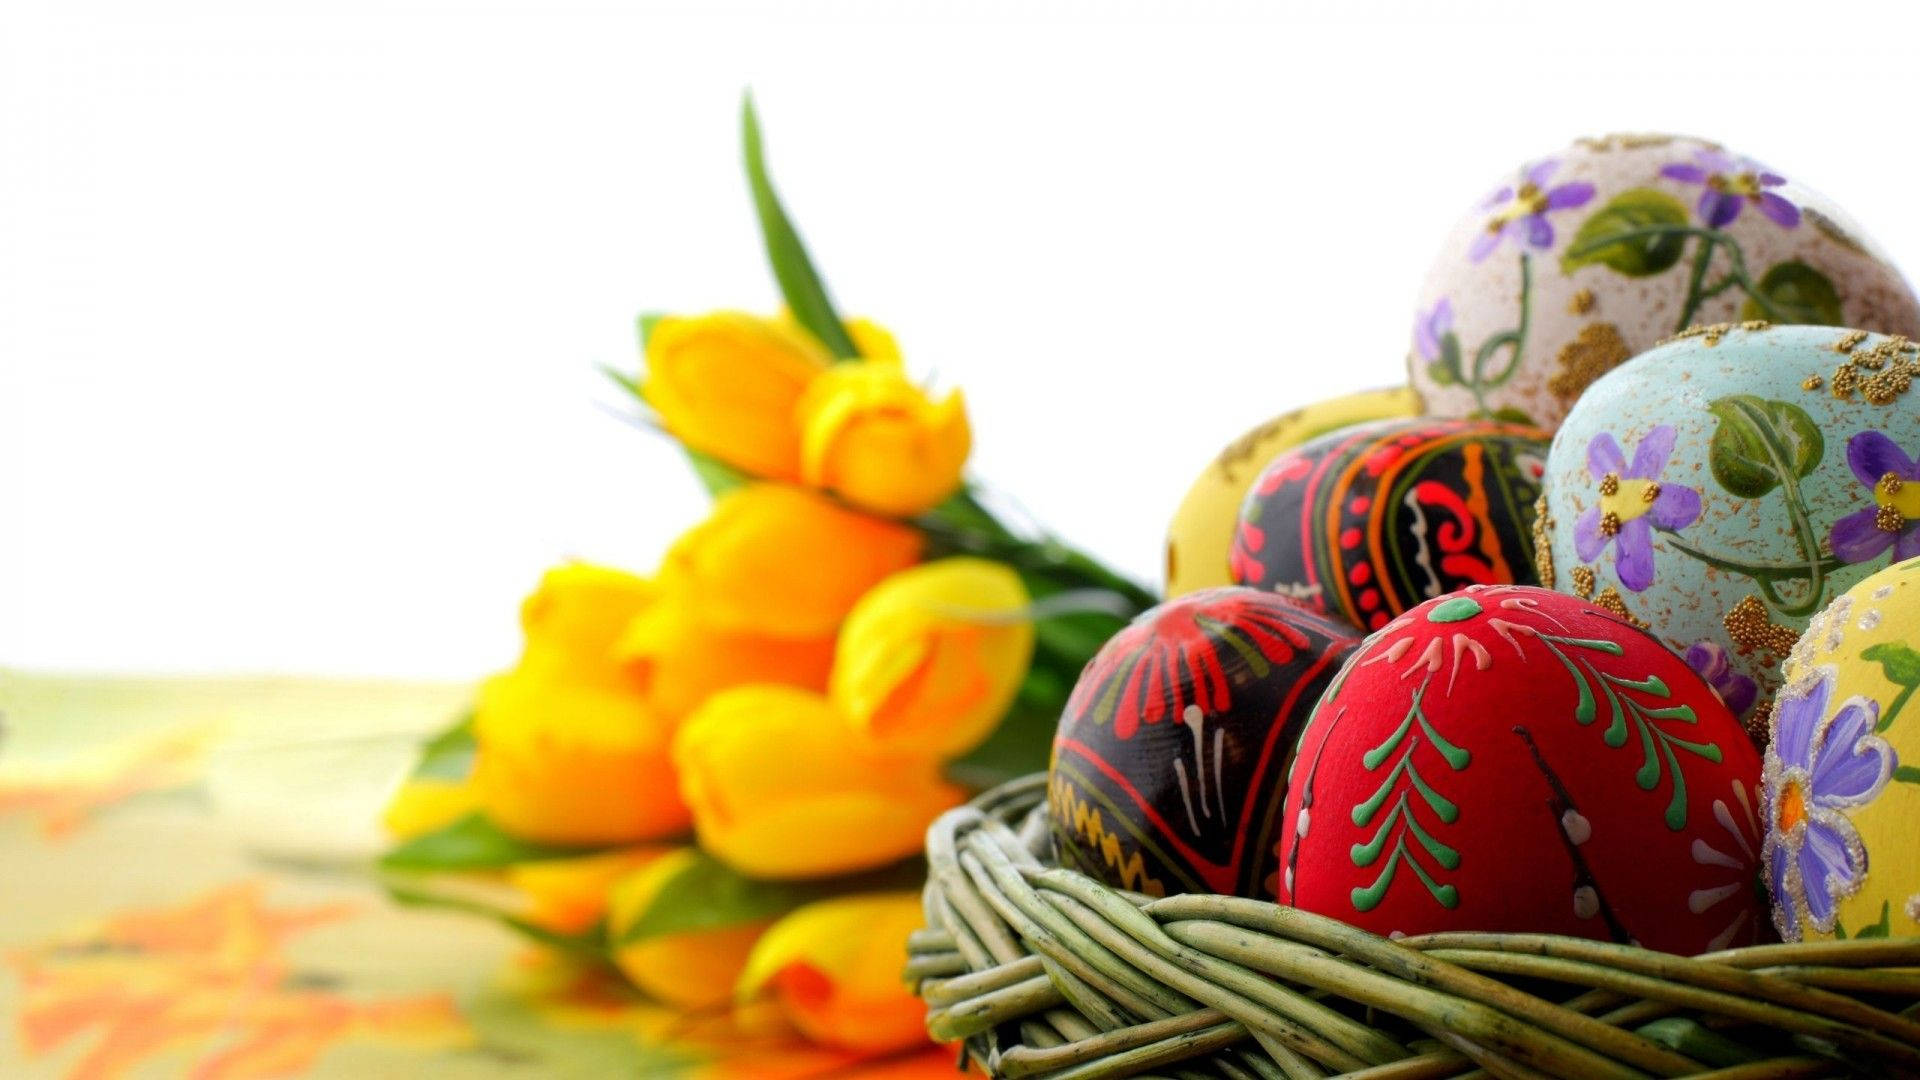 Welcome The Season Of Joy With Easter Eggs And Yellow Tulips! Background